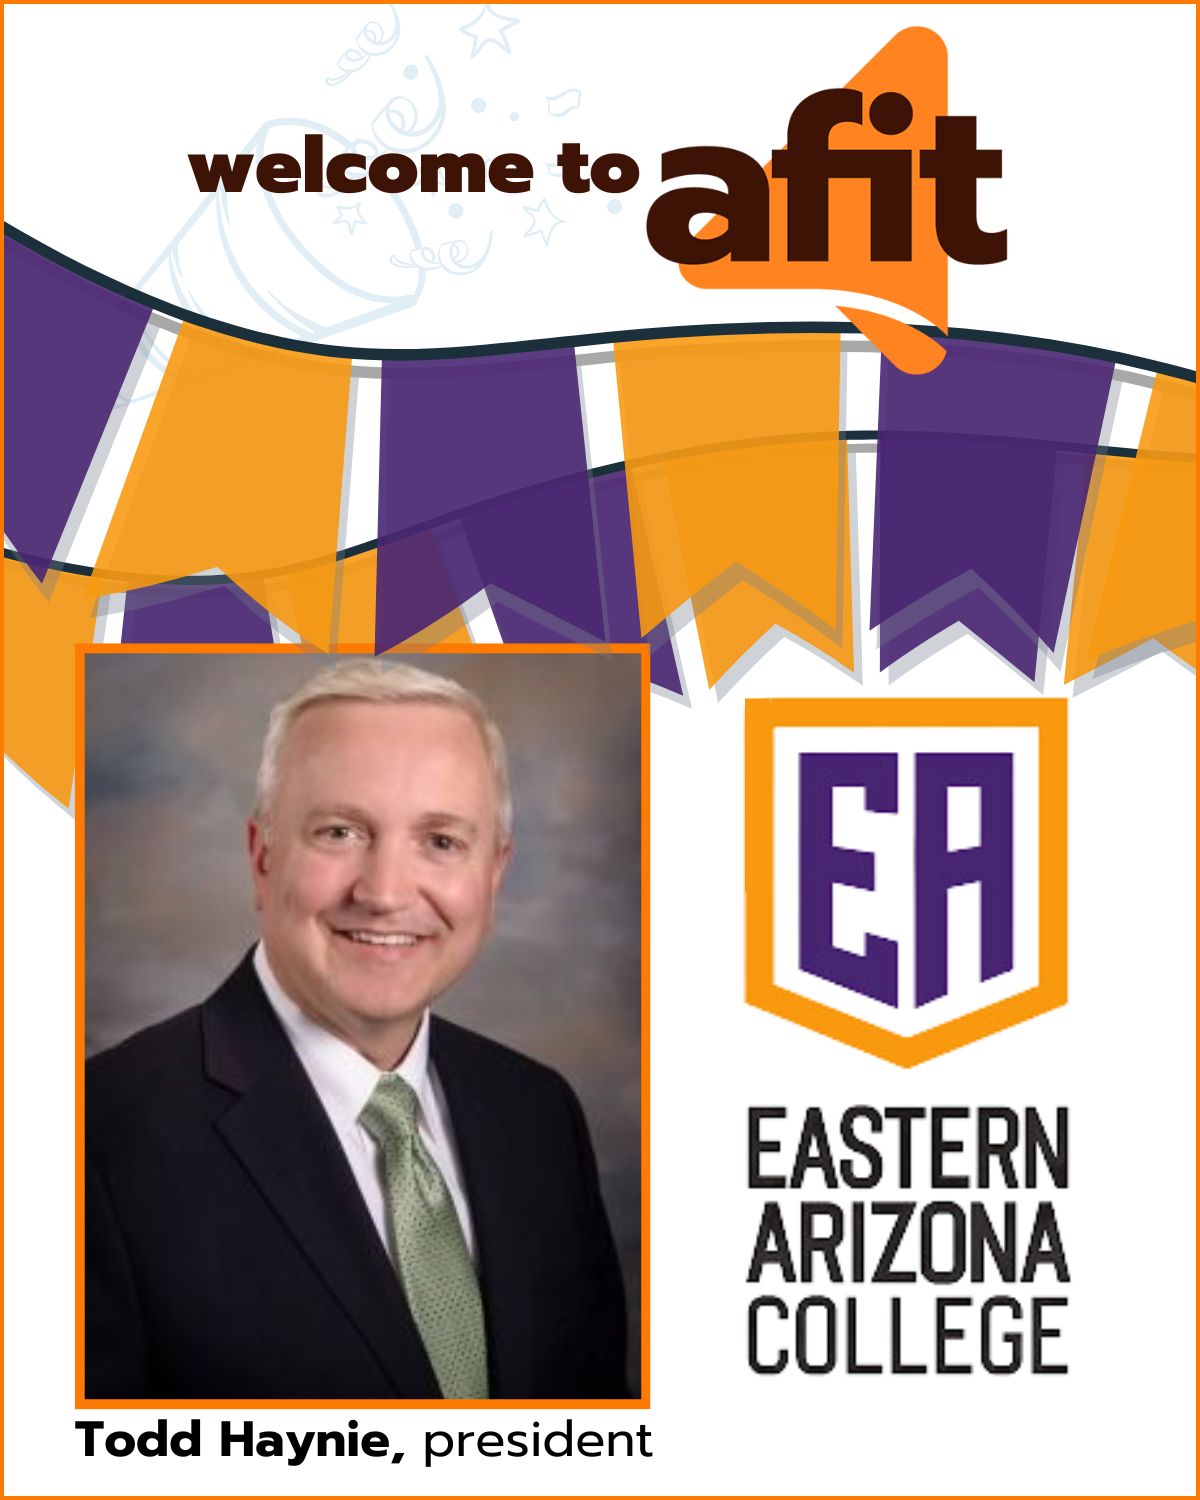 Please join us in welcoming Todd Haynie, president of Eastern Arizona College (EAC), to AFIT.  